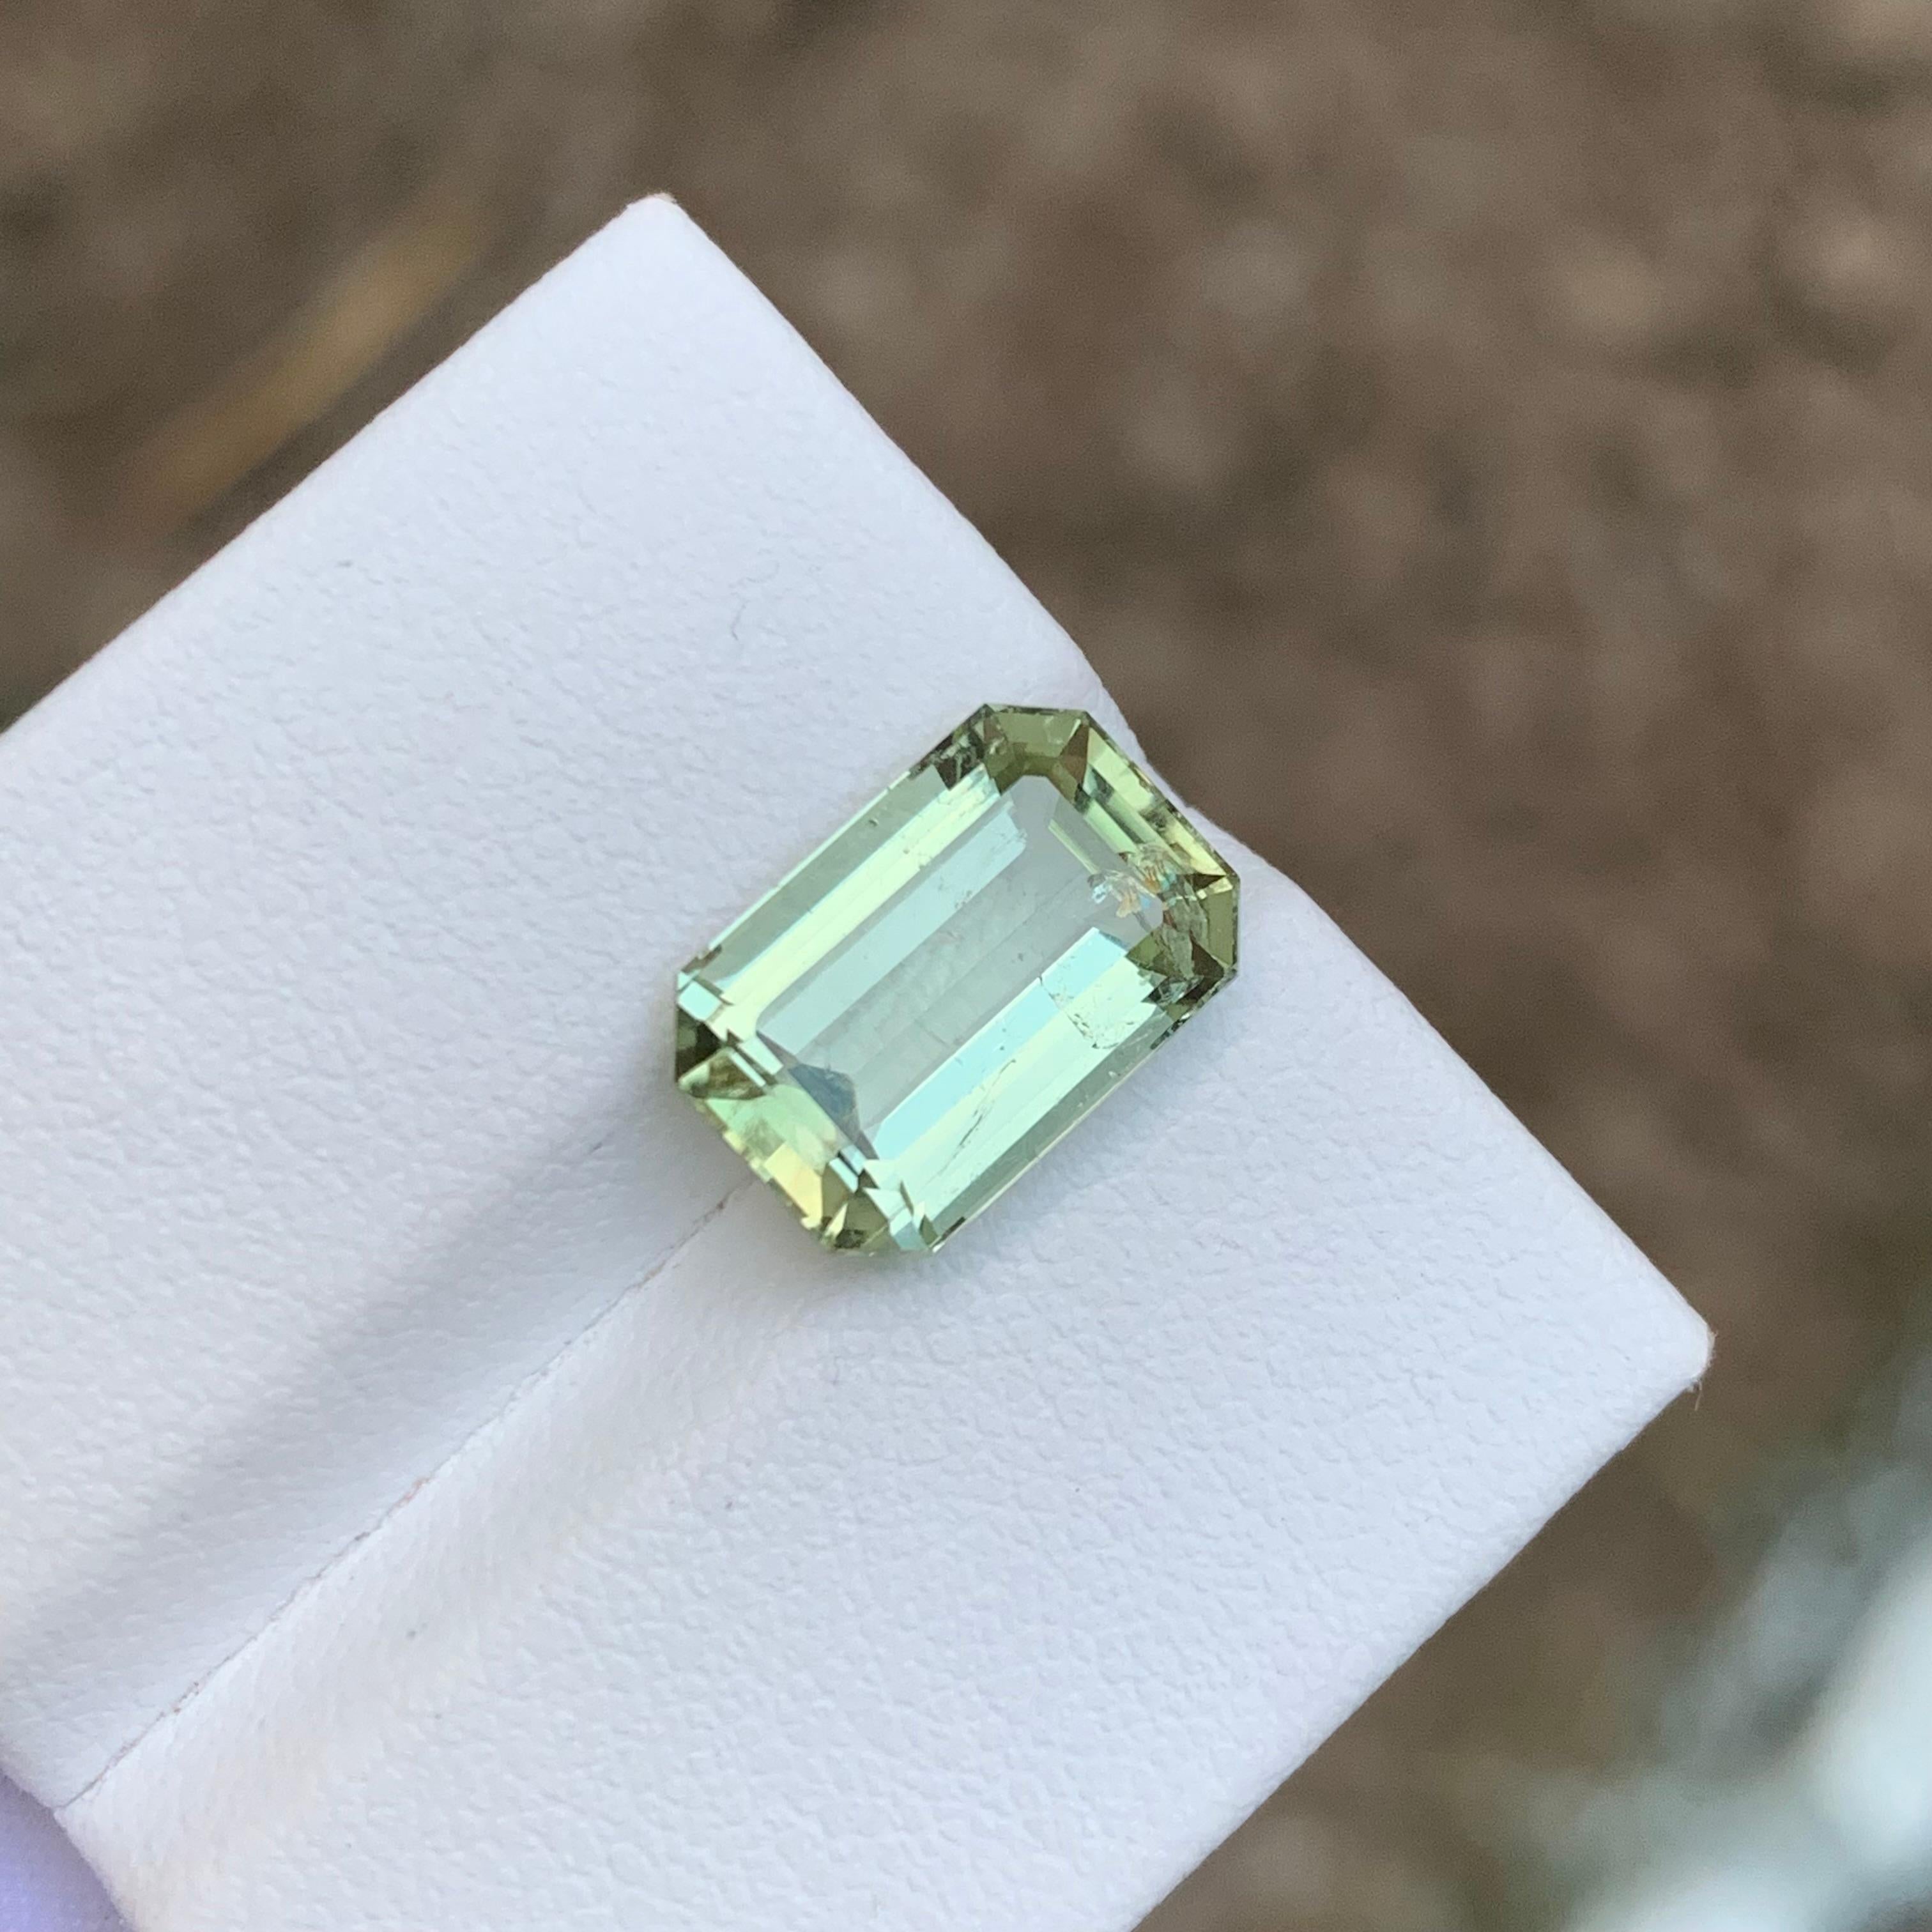 GEMSTONE TYPE: Tourmaline
PIECE(S): 1
WEIGHT: 5.05 Carats
SHAPE: Emerald
SIZE (MM): 12.33 x 8.31 x 5.68
COLOR: Pastel Green
CLARITY: Slightly Included 
TREATMENT: None
ORIGIN: Afghanistan
CERTIFICATE: On demand

Indulge in the unparalleled allure of